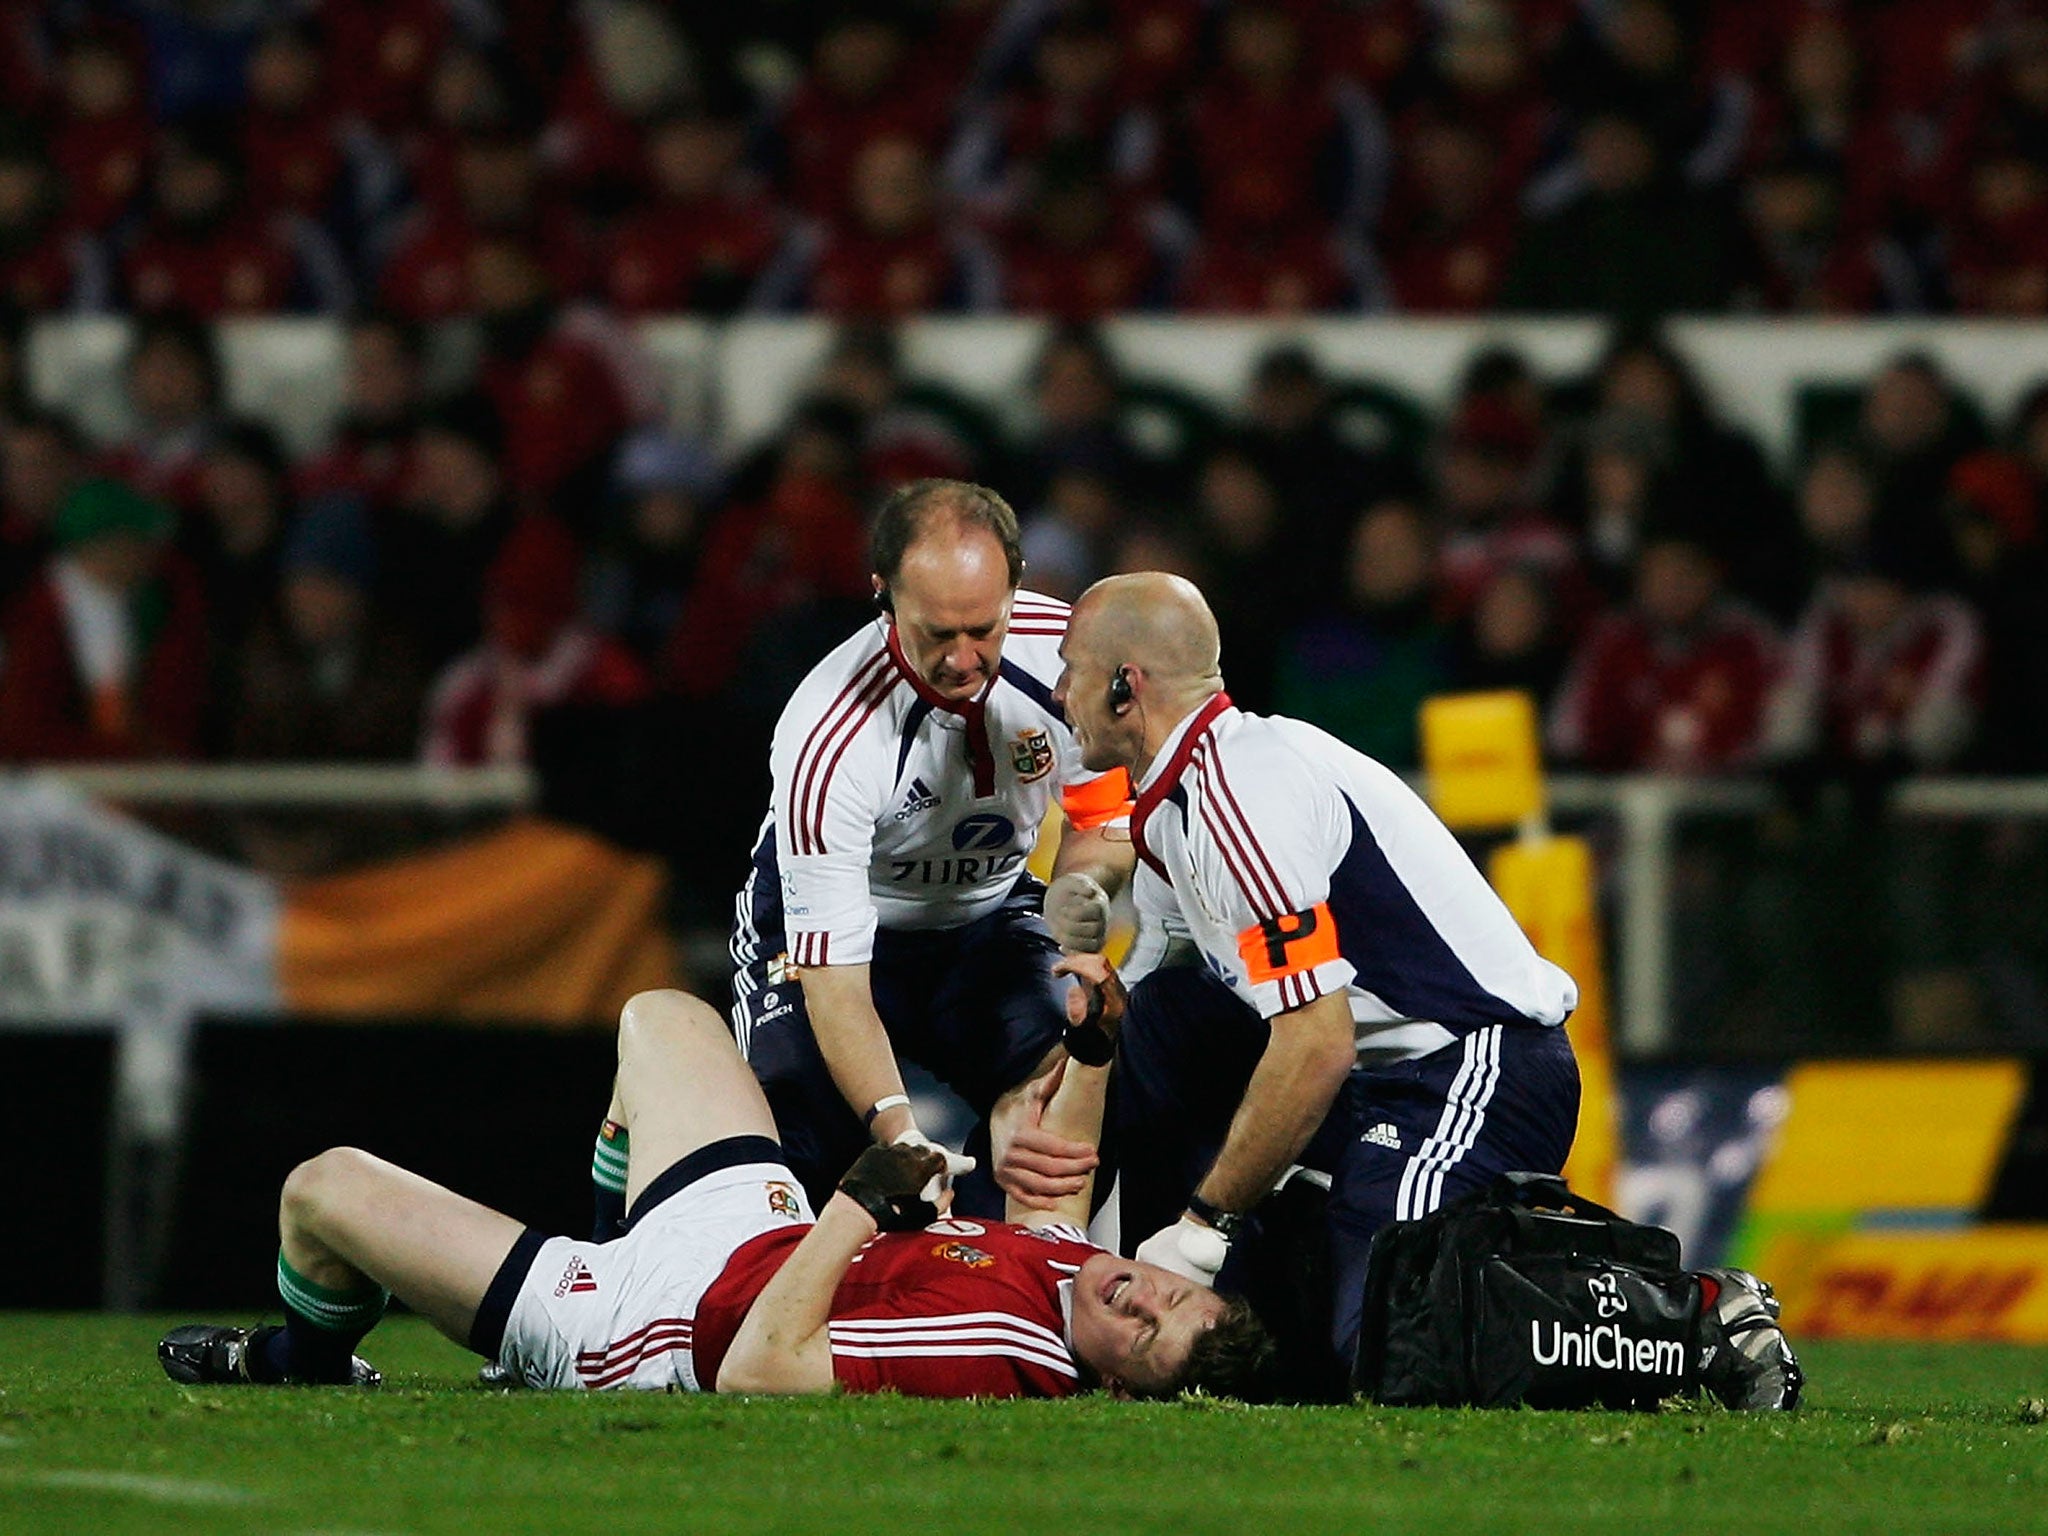 Brian O’Driscoll receives treatment following the spear tackle